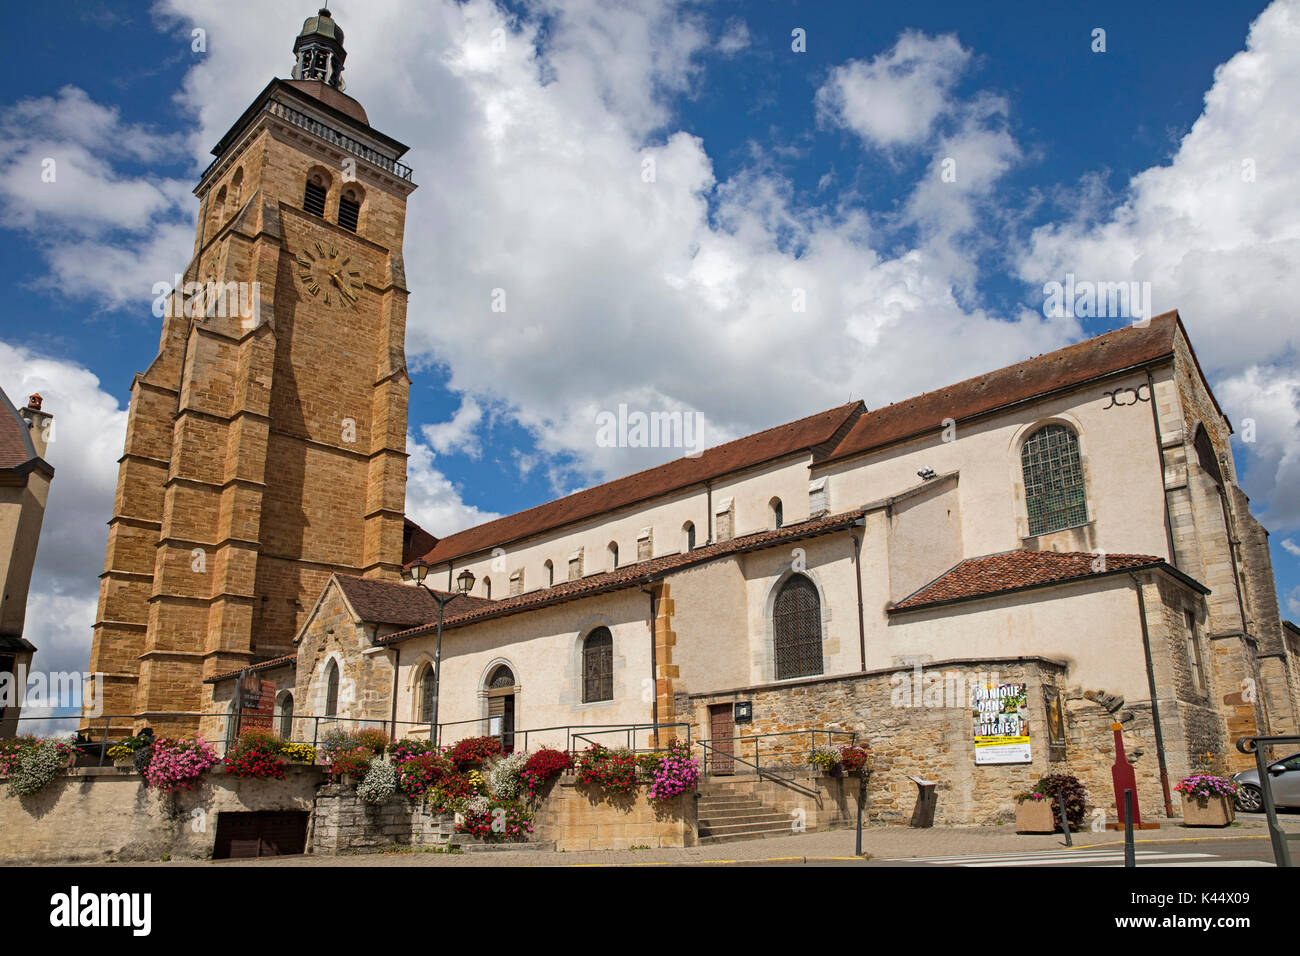 The église Saint-Just / Church of St Just in the town Arbois, commune in the Jura department, Franche-Comté, Lons-le-Saunier, France Stock Photo